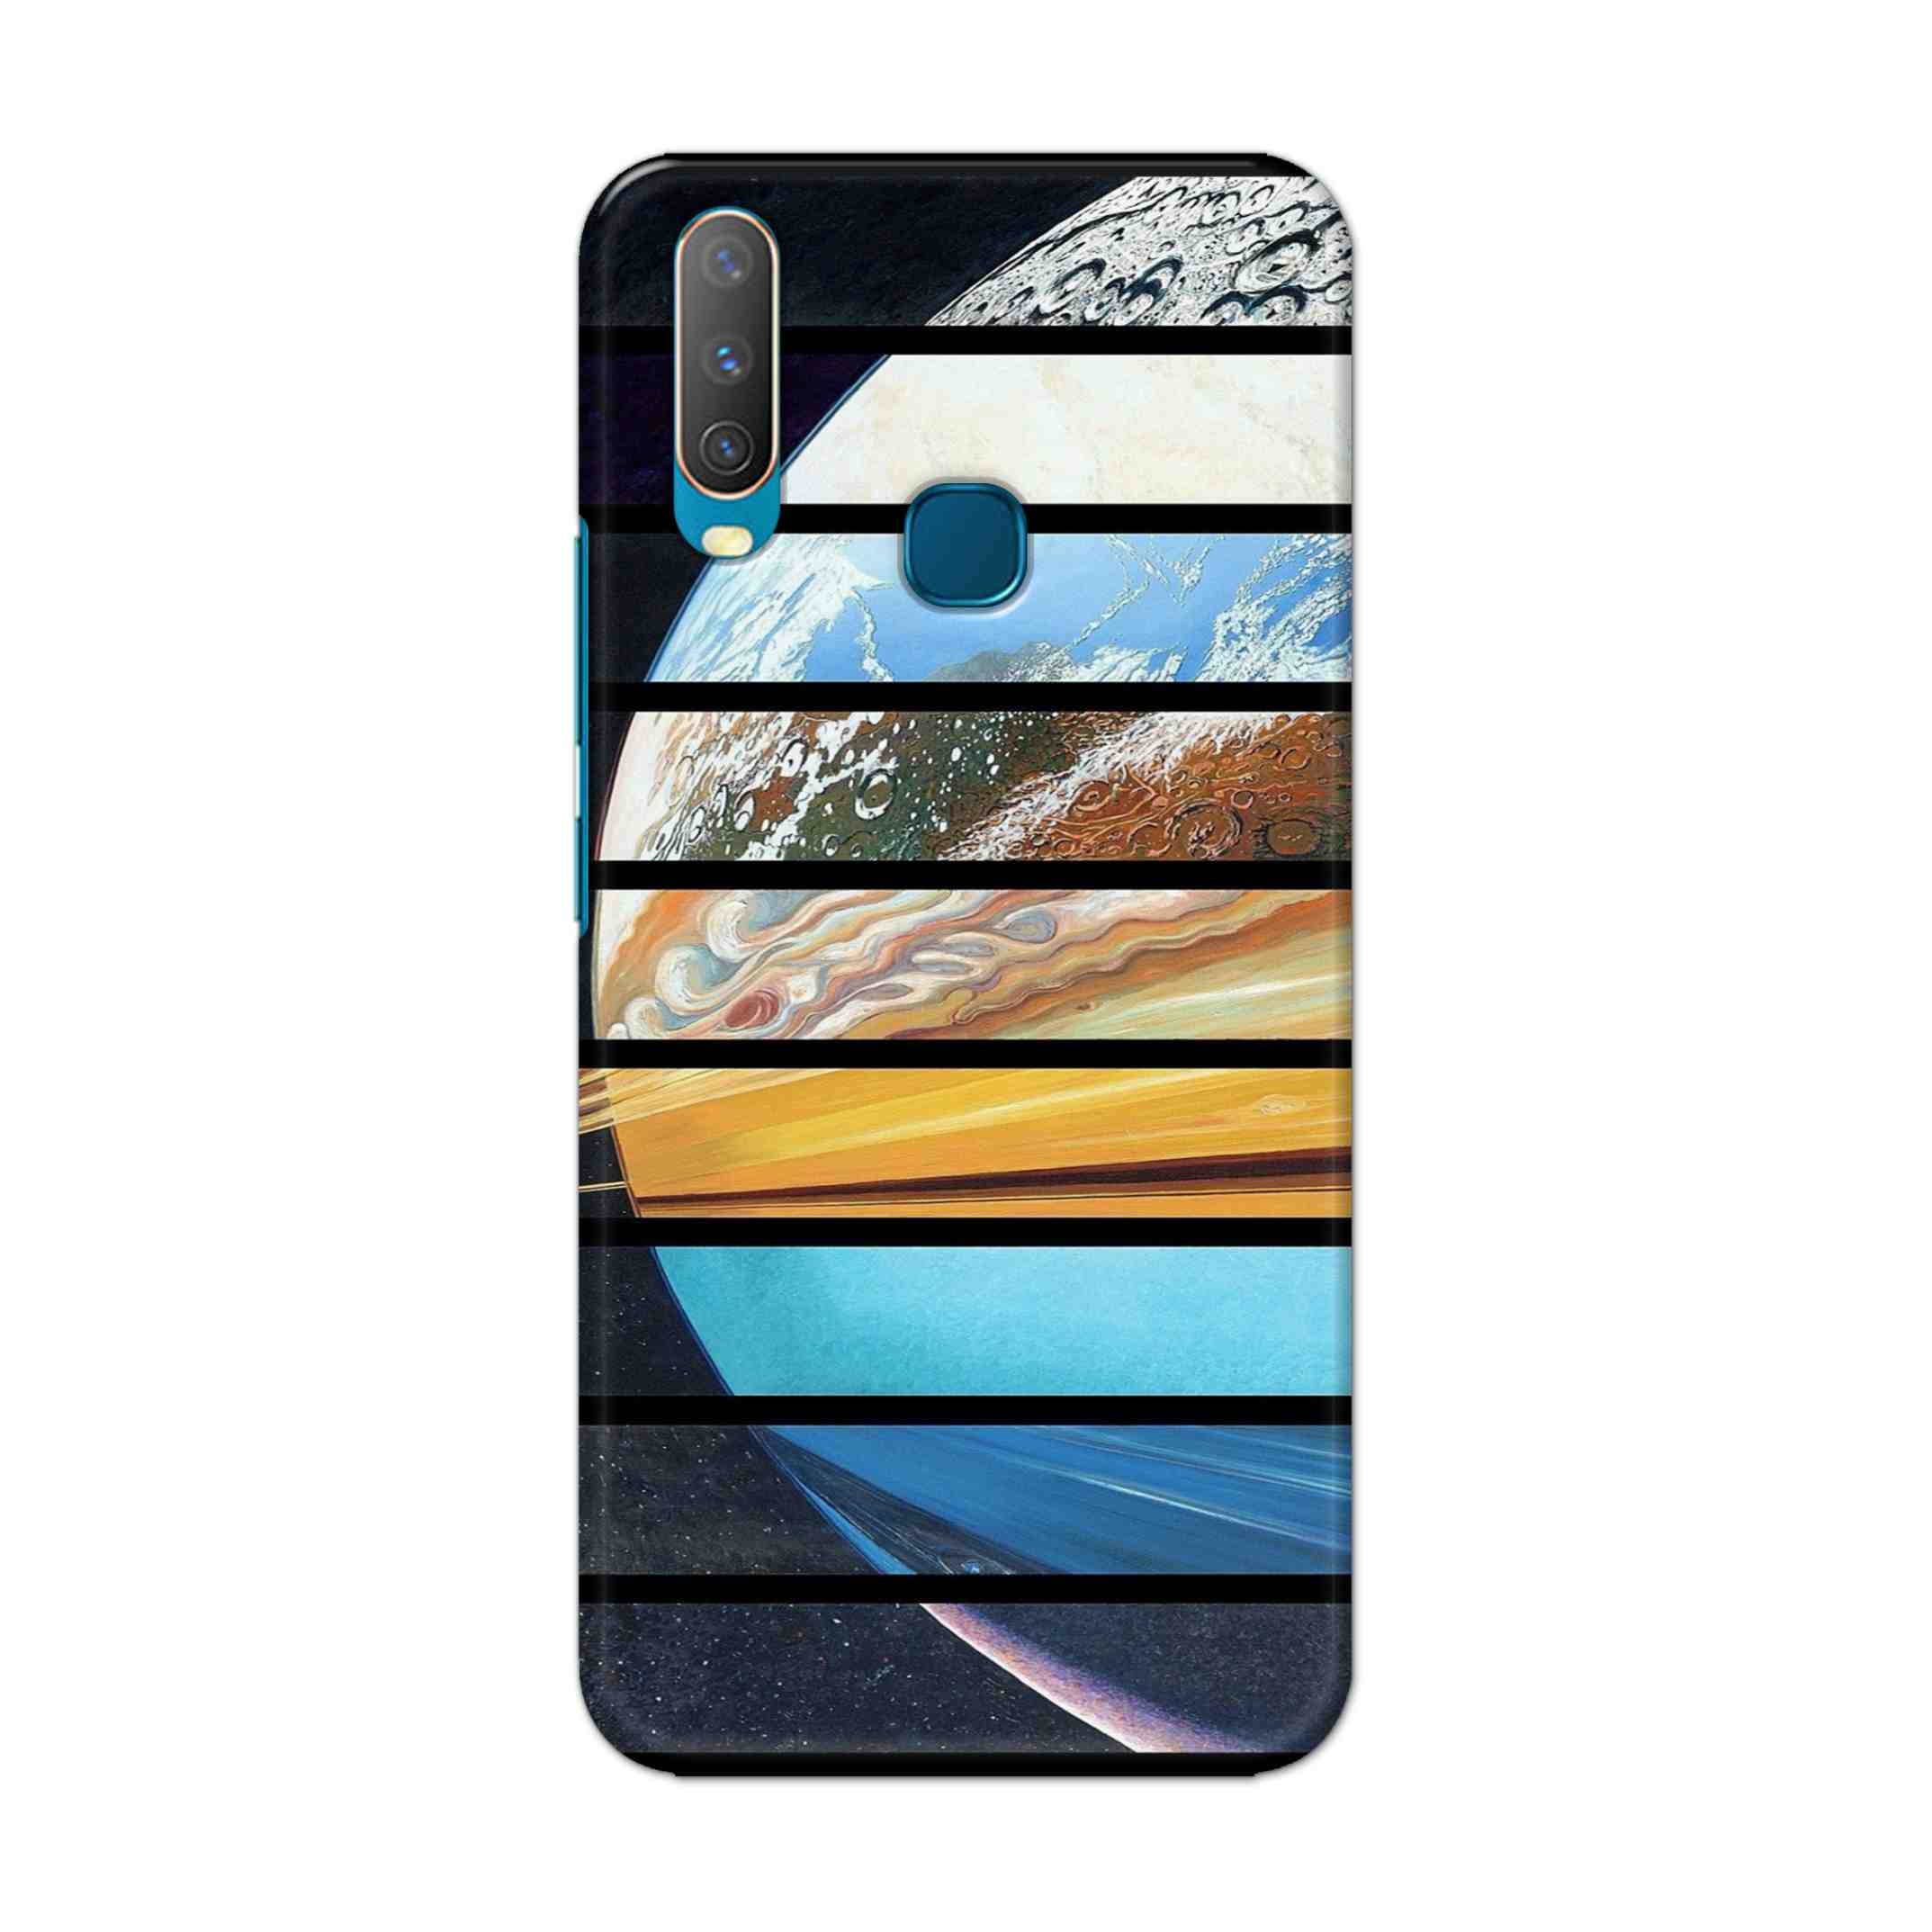 Buy Colourful Earth Hard Back Mobile Phone Case Cover For Vivo Y17 / U10 Online